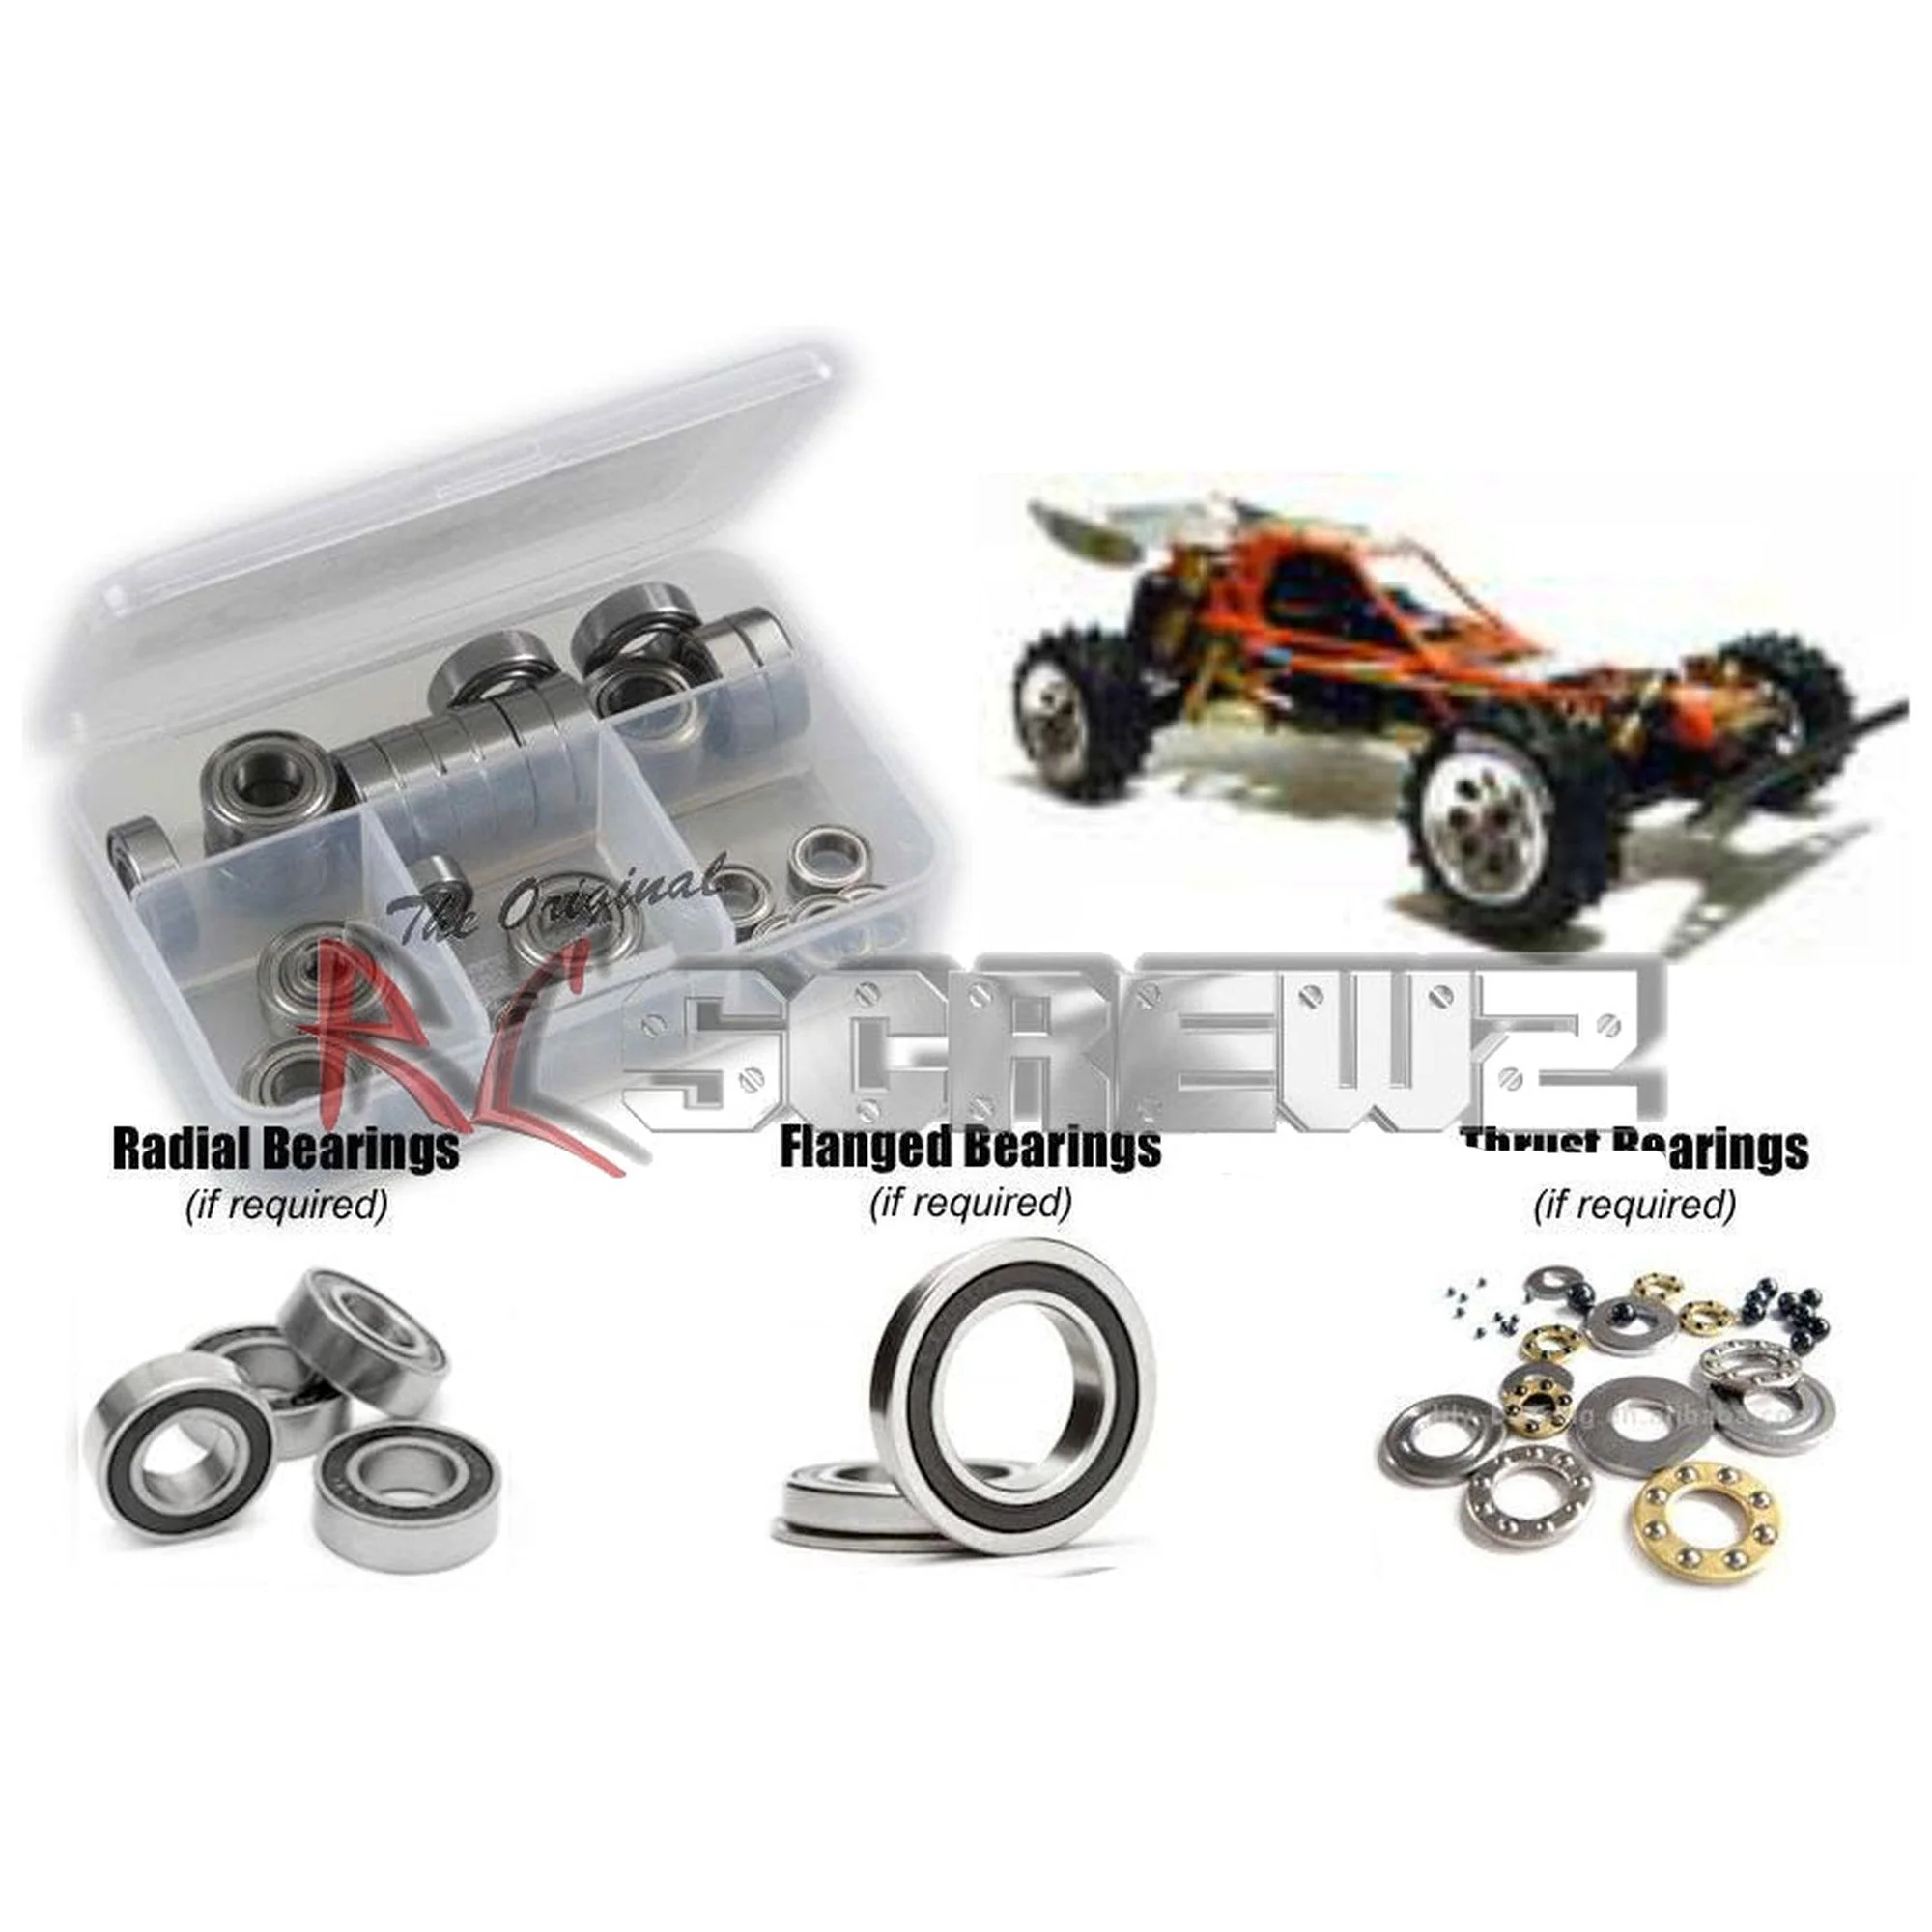 RCScrewZ Rubber Shielded Bearing Kit kyo012r for Kyosho Javelin Vintage/#30618B - Picture 1 of 12